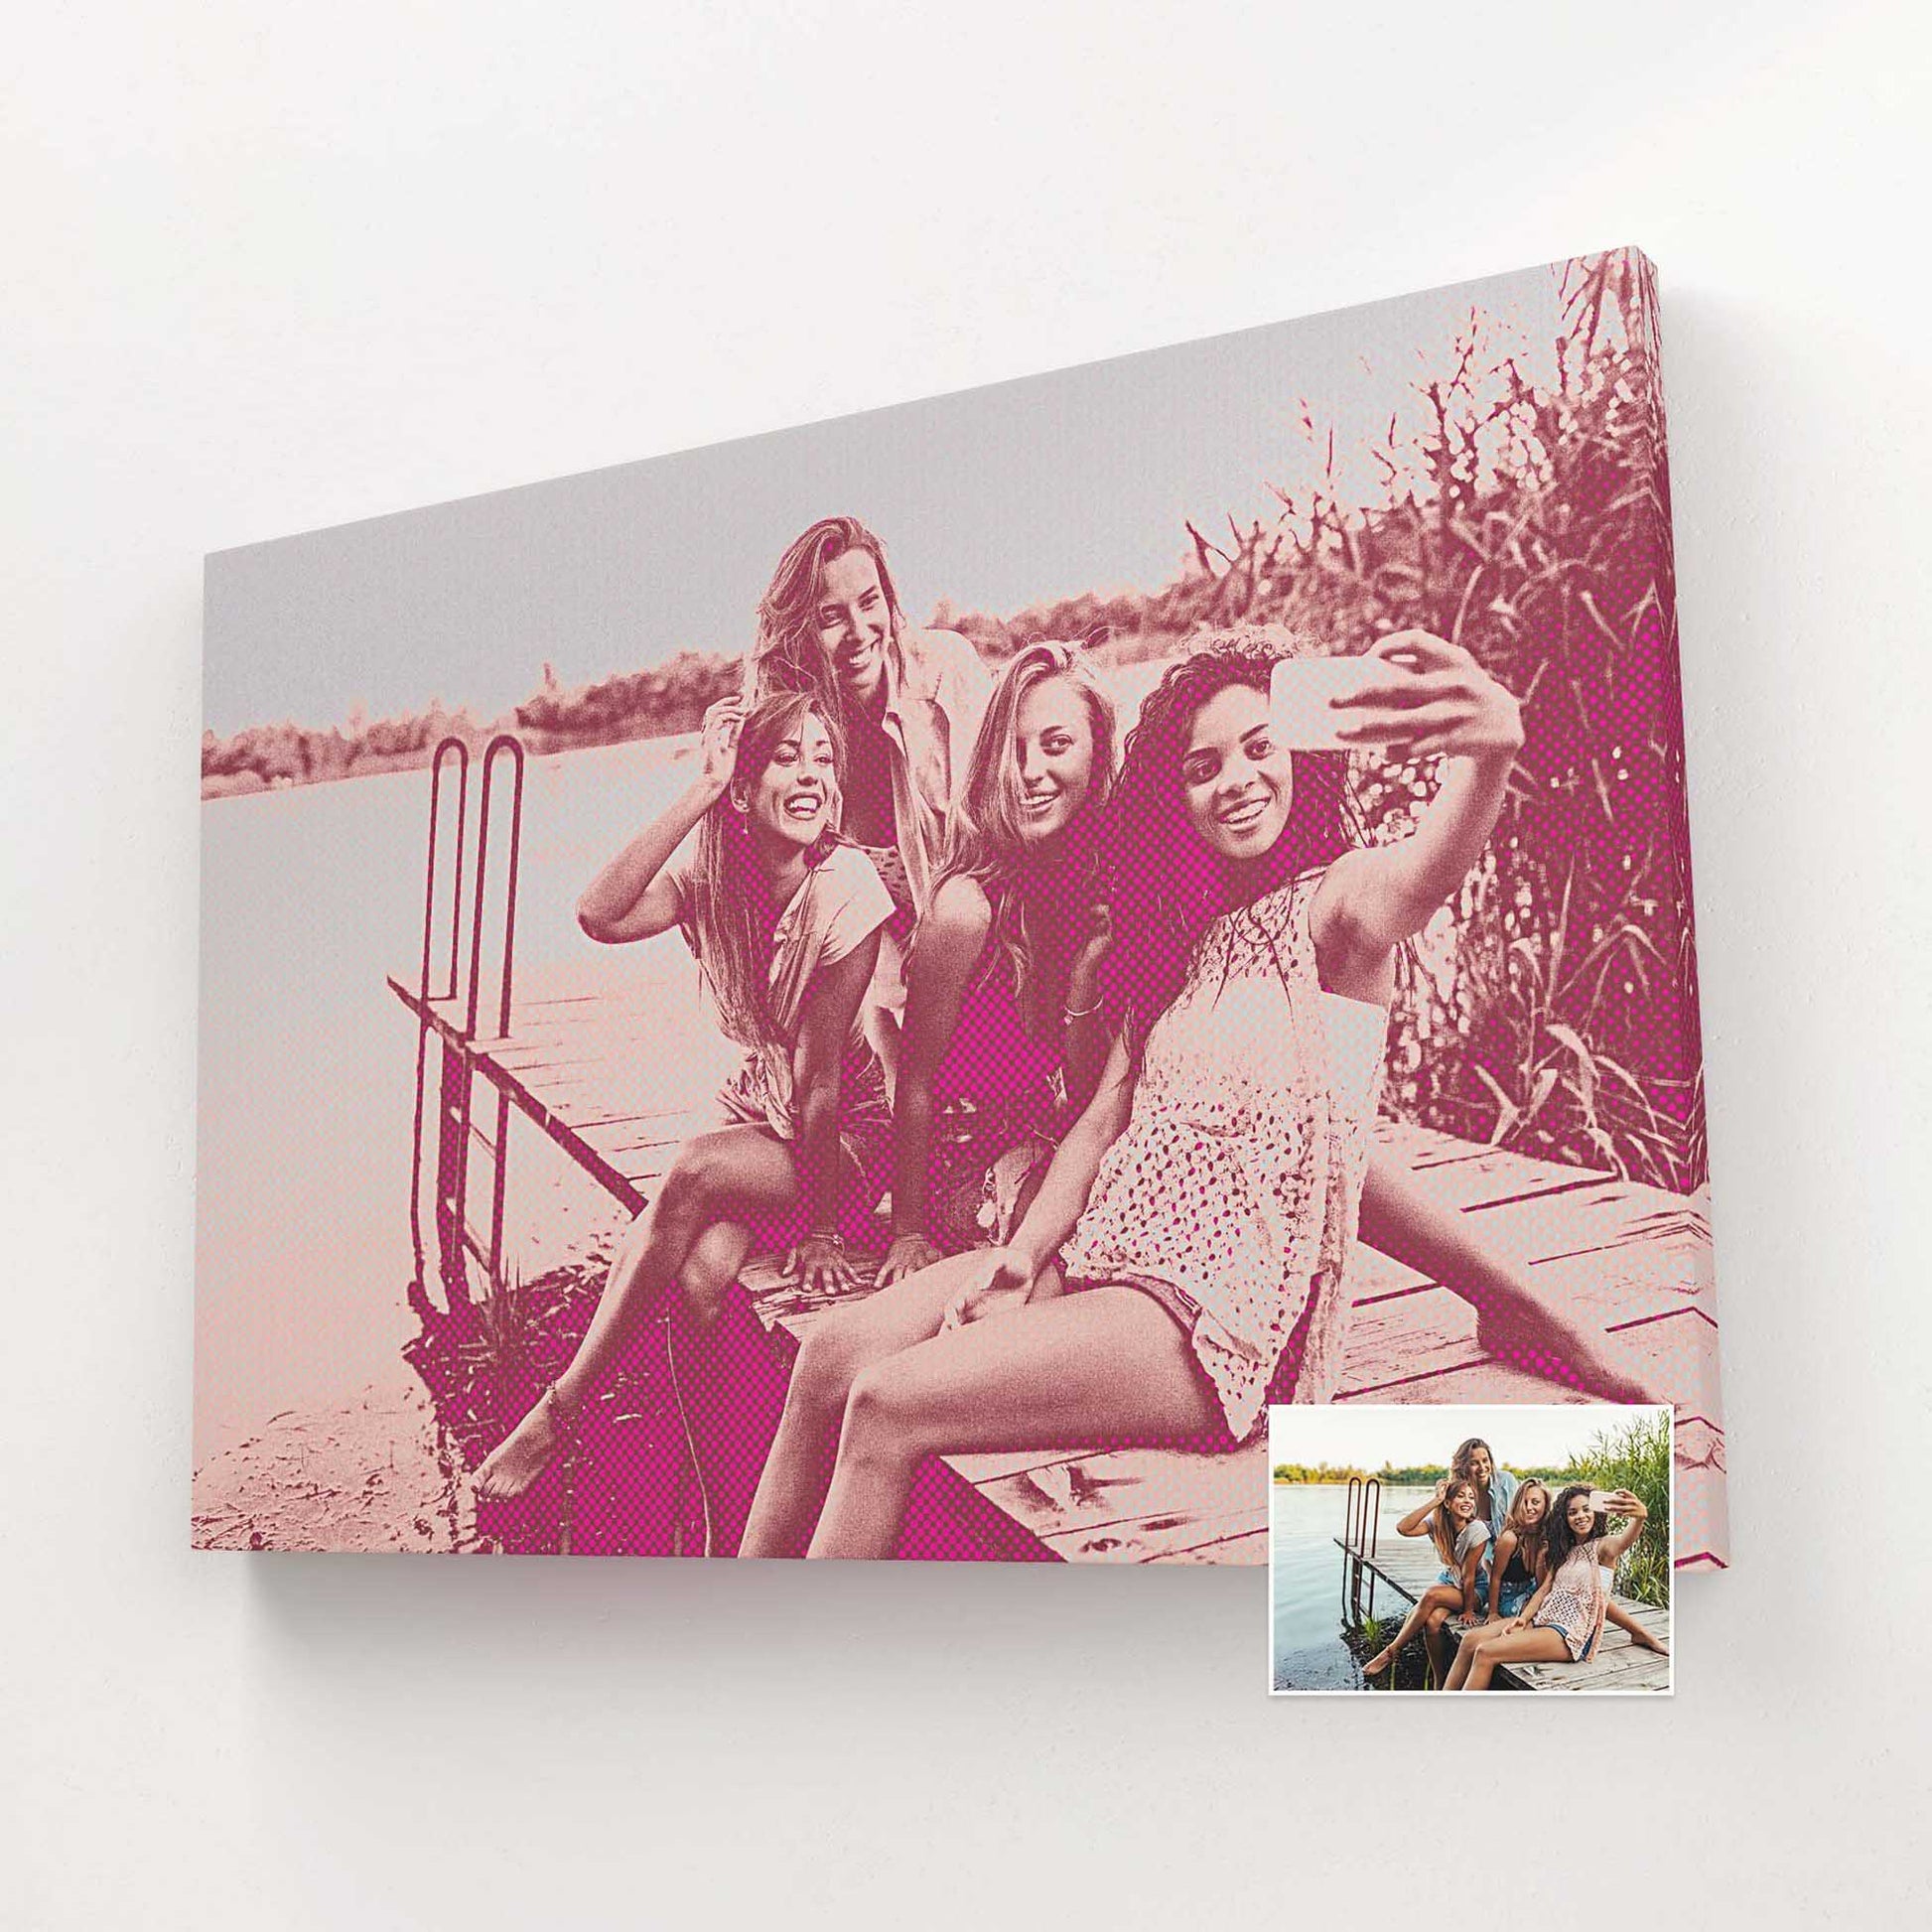 Make a splash with our Personalised Pink Pop Art Canvas. Bursting with vibrant colors and a cool, trendy vibe, it's the epitome of hip and unique decor. Handcrafted with a halftone texture and personalized print, bespoke canvas 